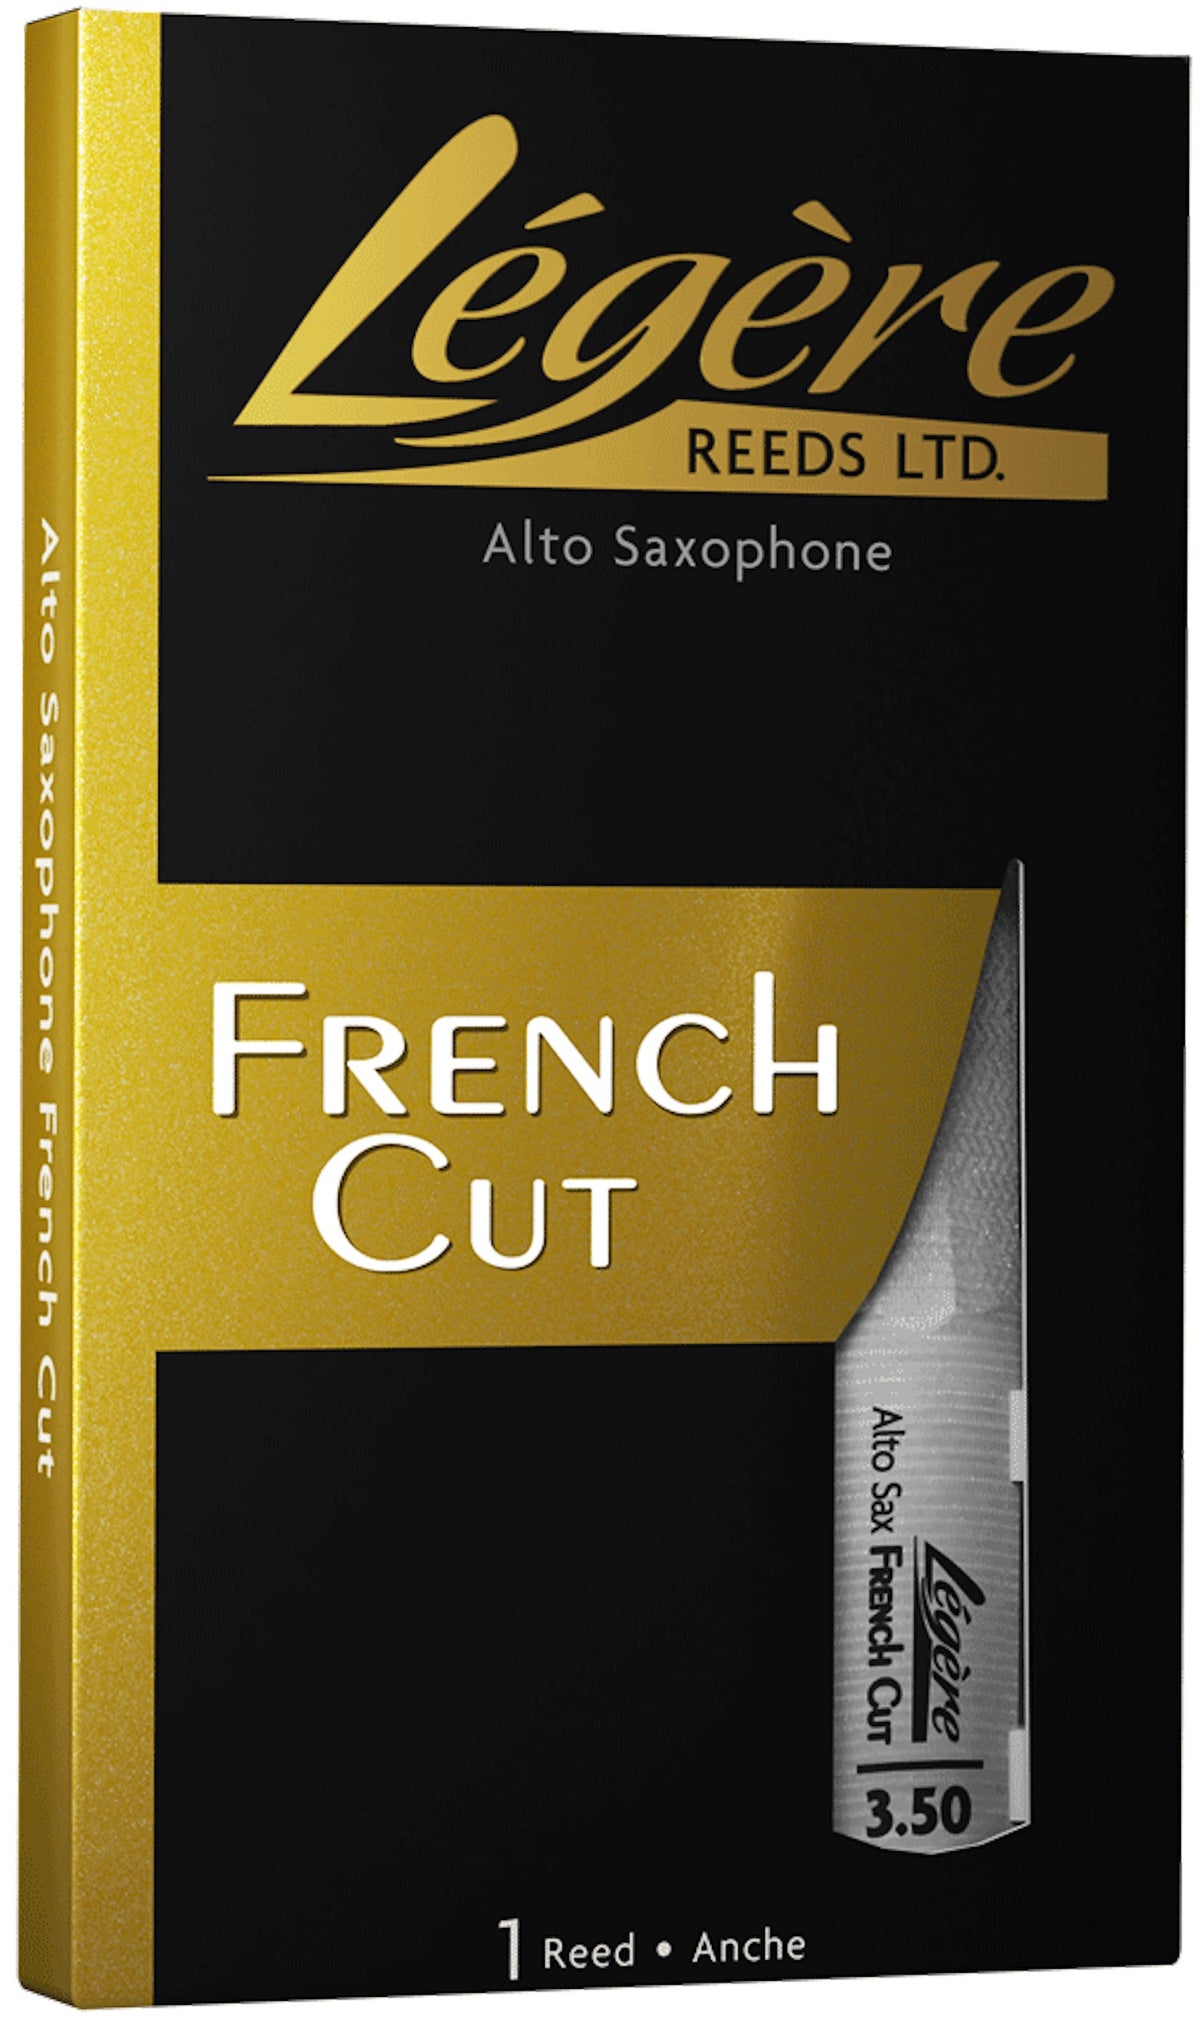 legere-alto-saxophone-french-cut-reed